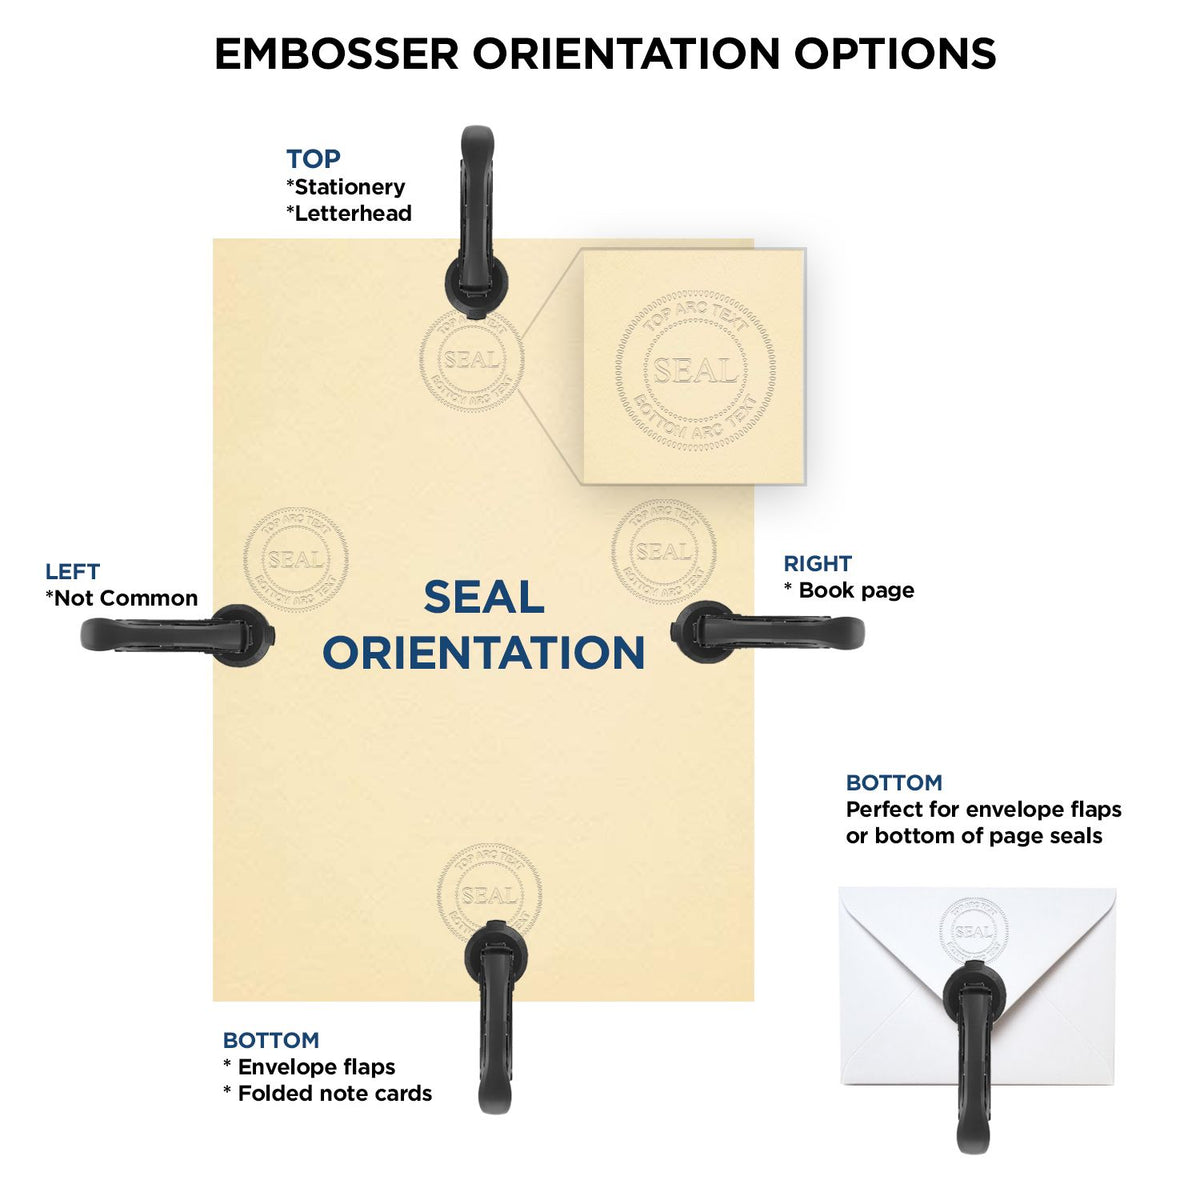 An infographic for the New York Desk Architect Embossing Seal showing embosser orientation, this is showing examples of a top, bottom, right and left insert.